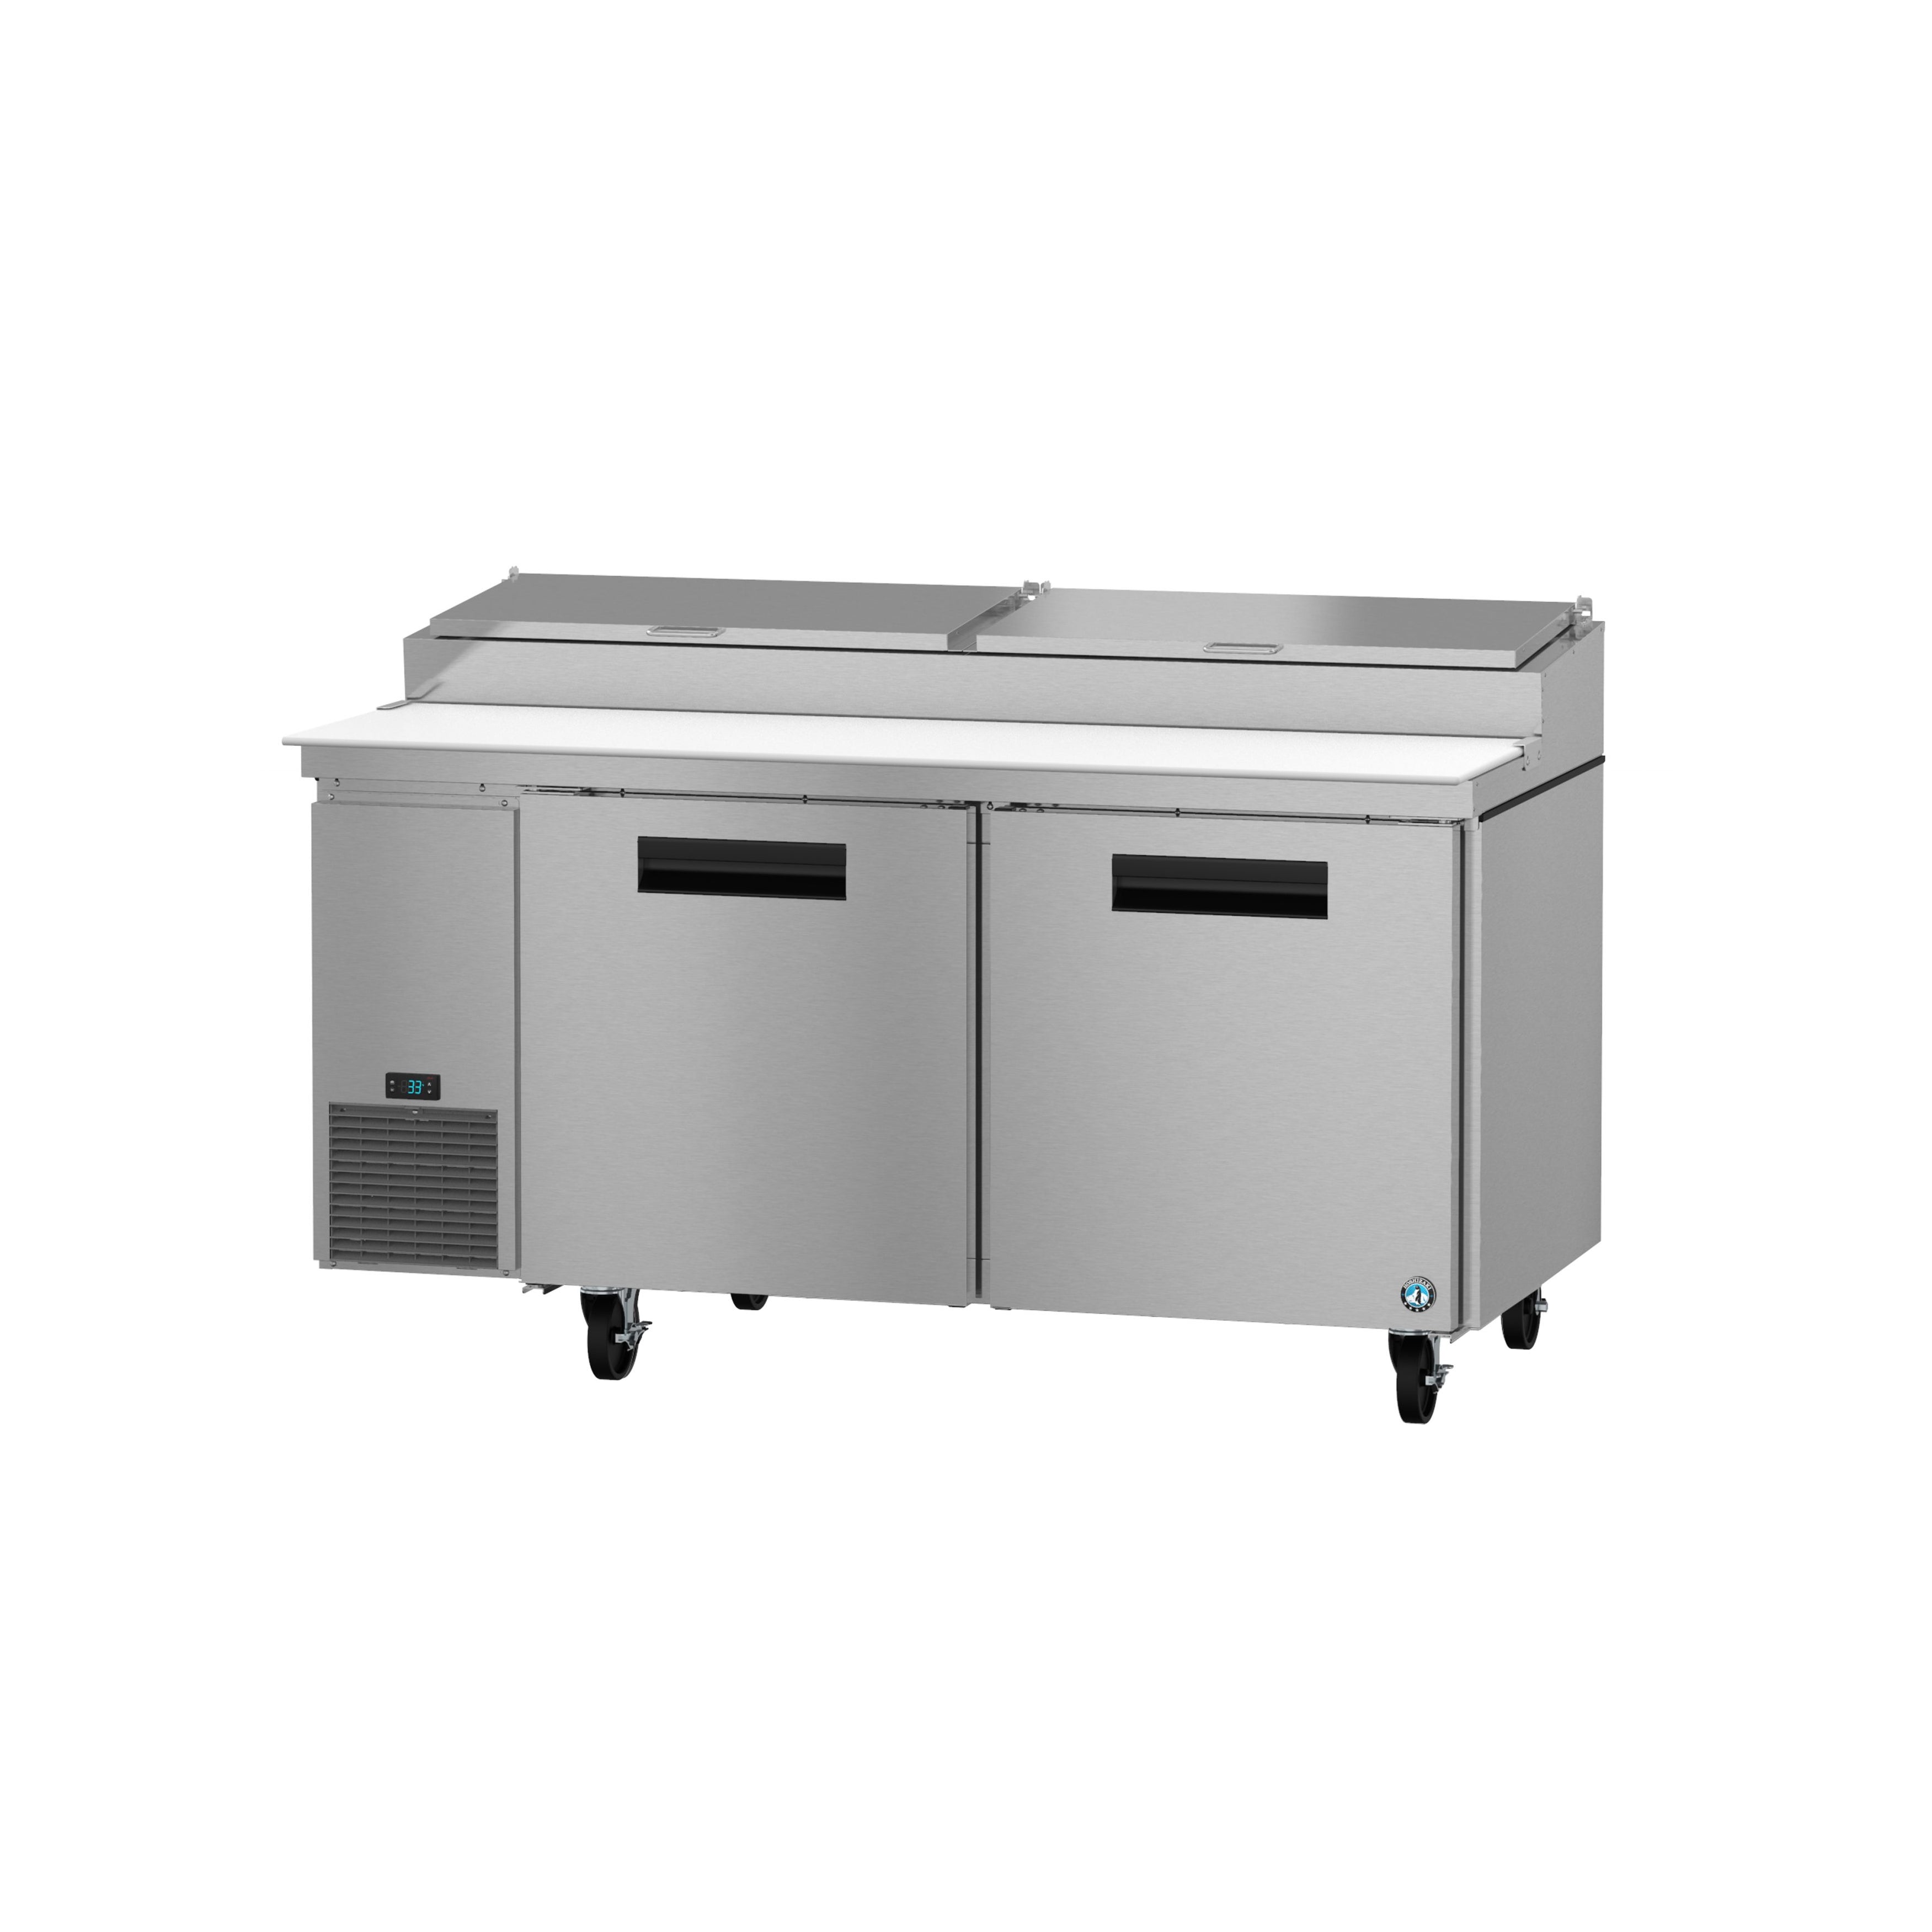 Hoshizaki - PR67A, Commercial 67" Two Section Pizza Prep Table Refrigerator Stainless Doors 19.9cu.ft.